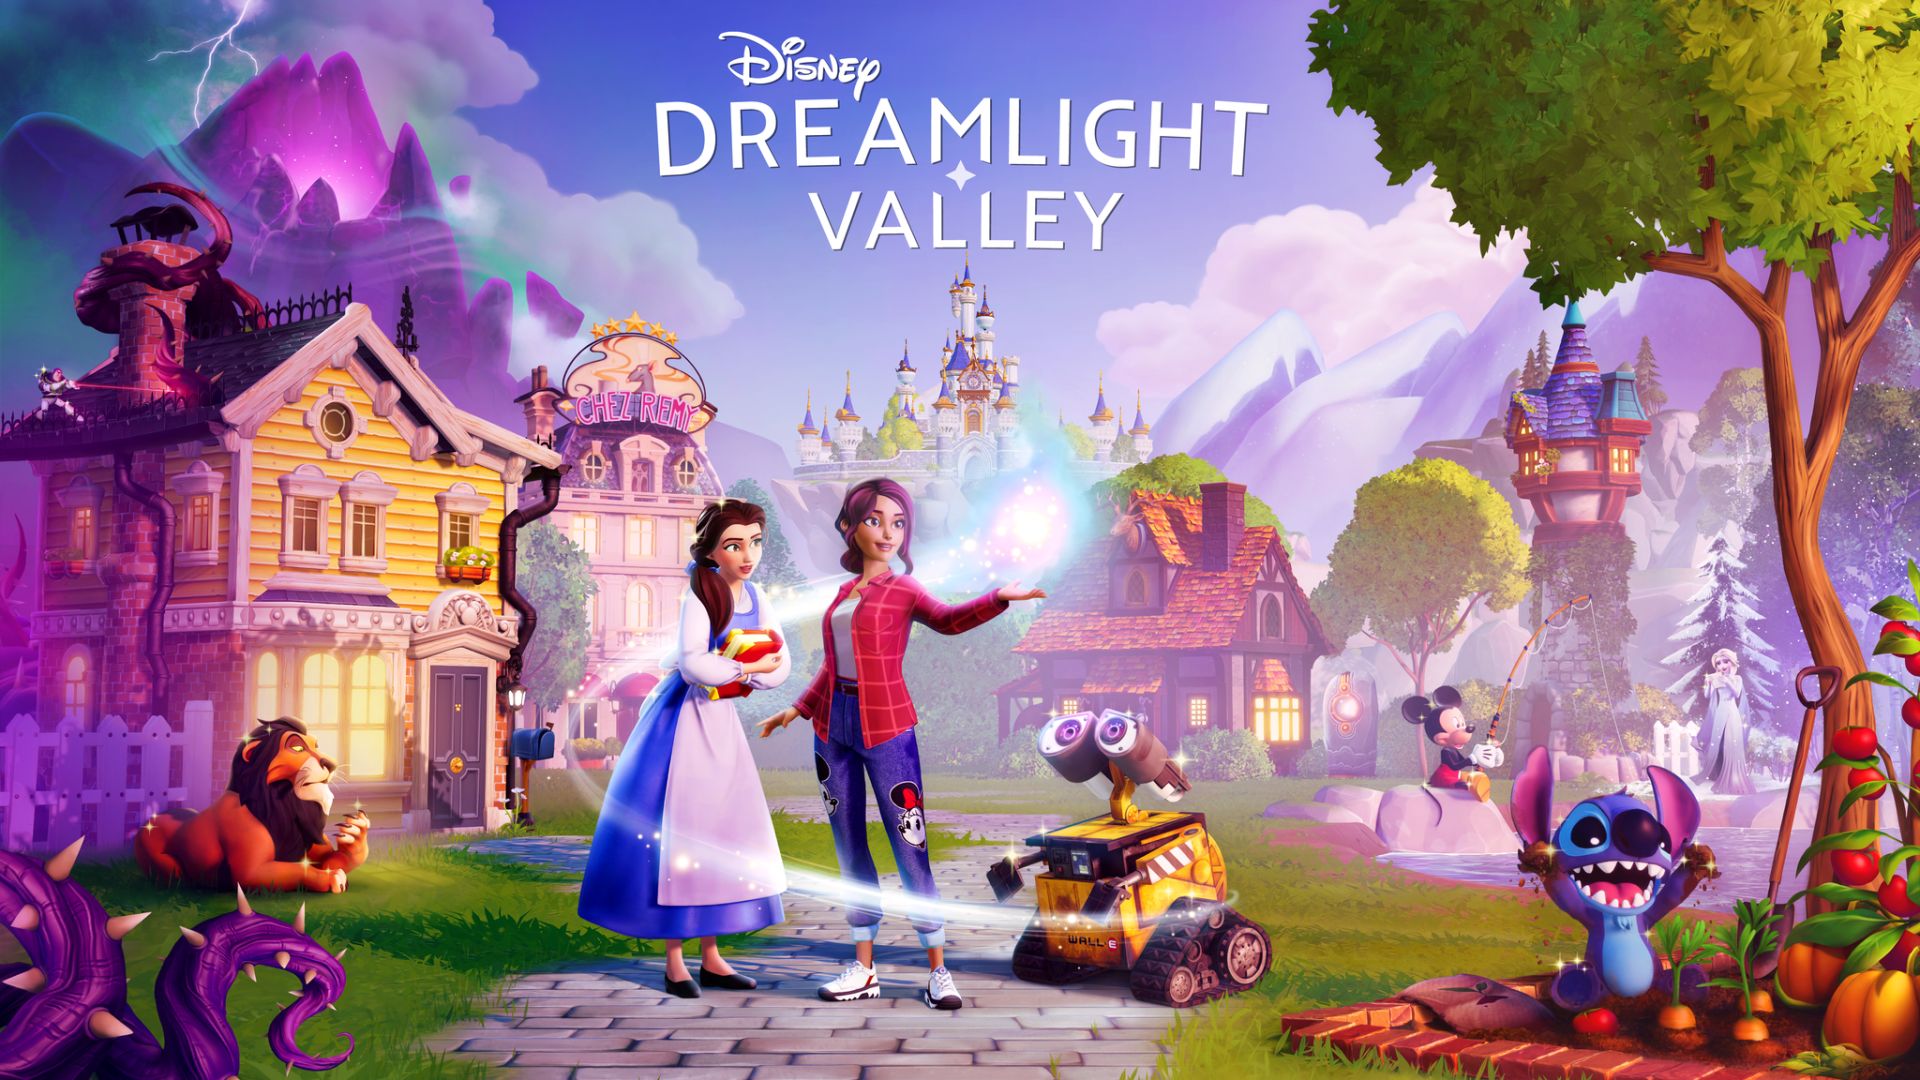 Coming to Xbox Game Pass: Disney Dreamlight Valley, You Suck at Parking, Metal: Hellsinger, and More